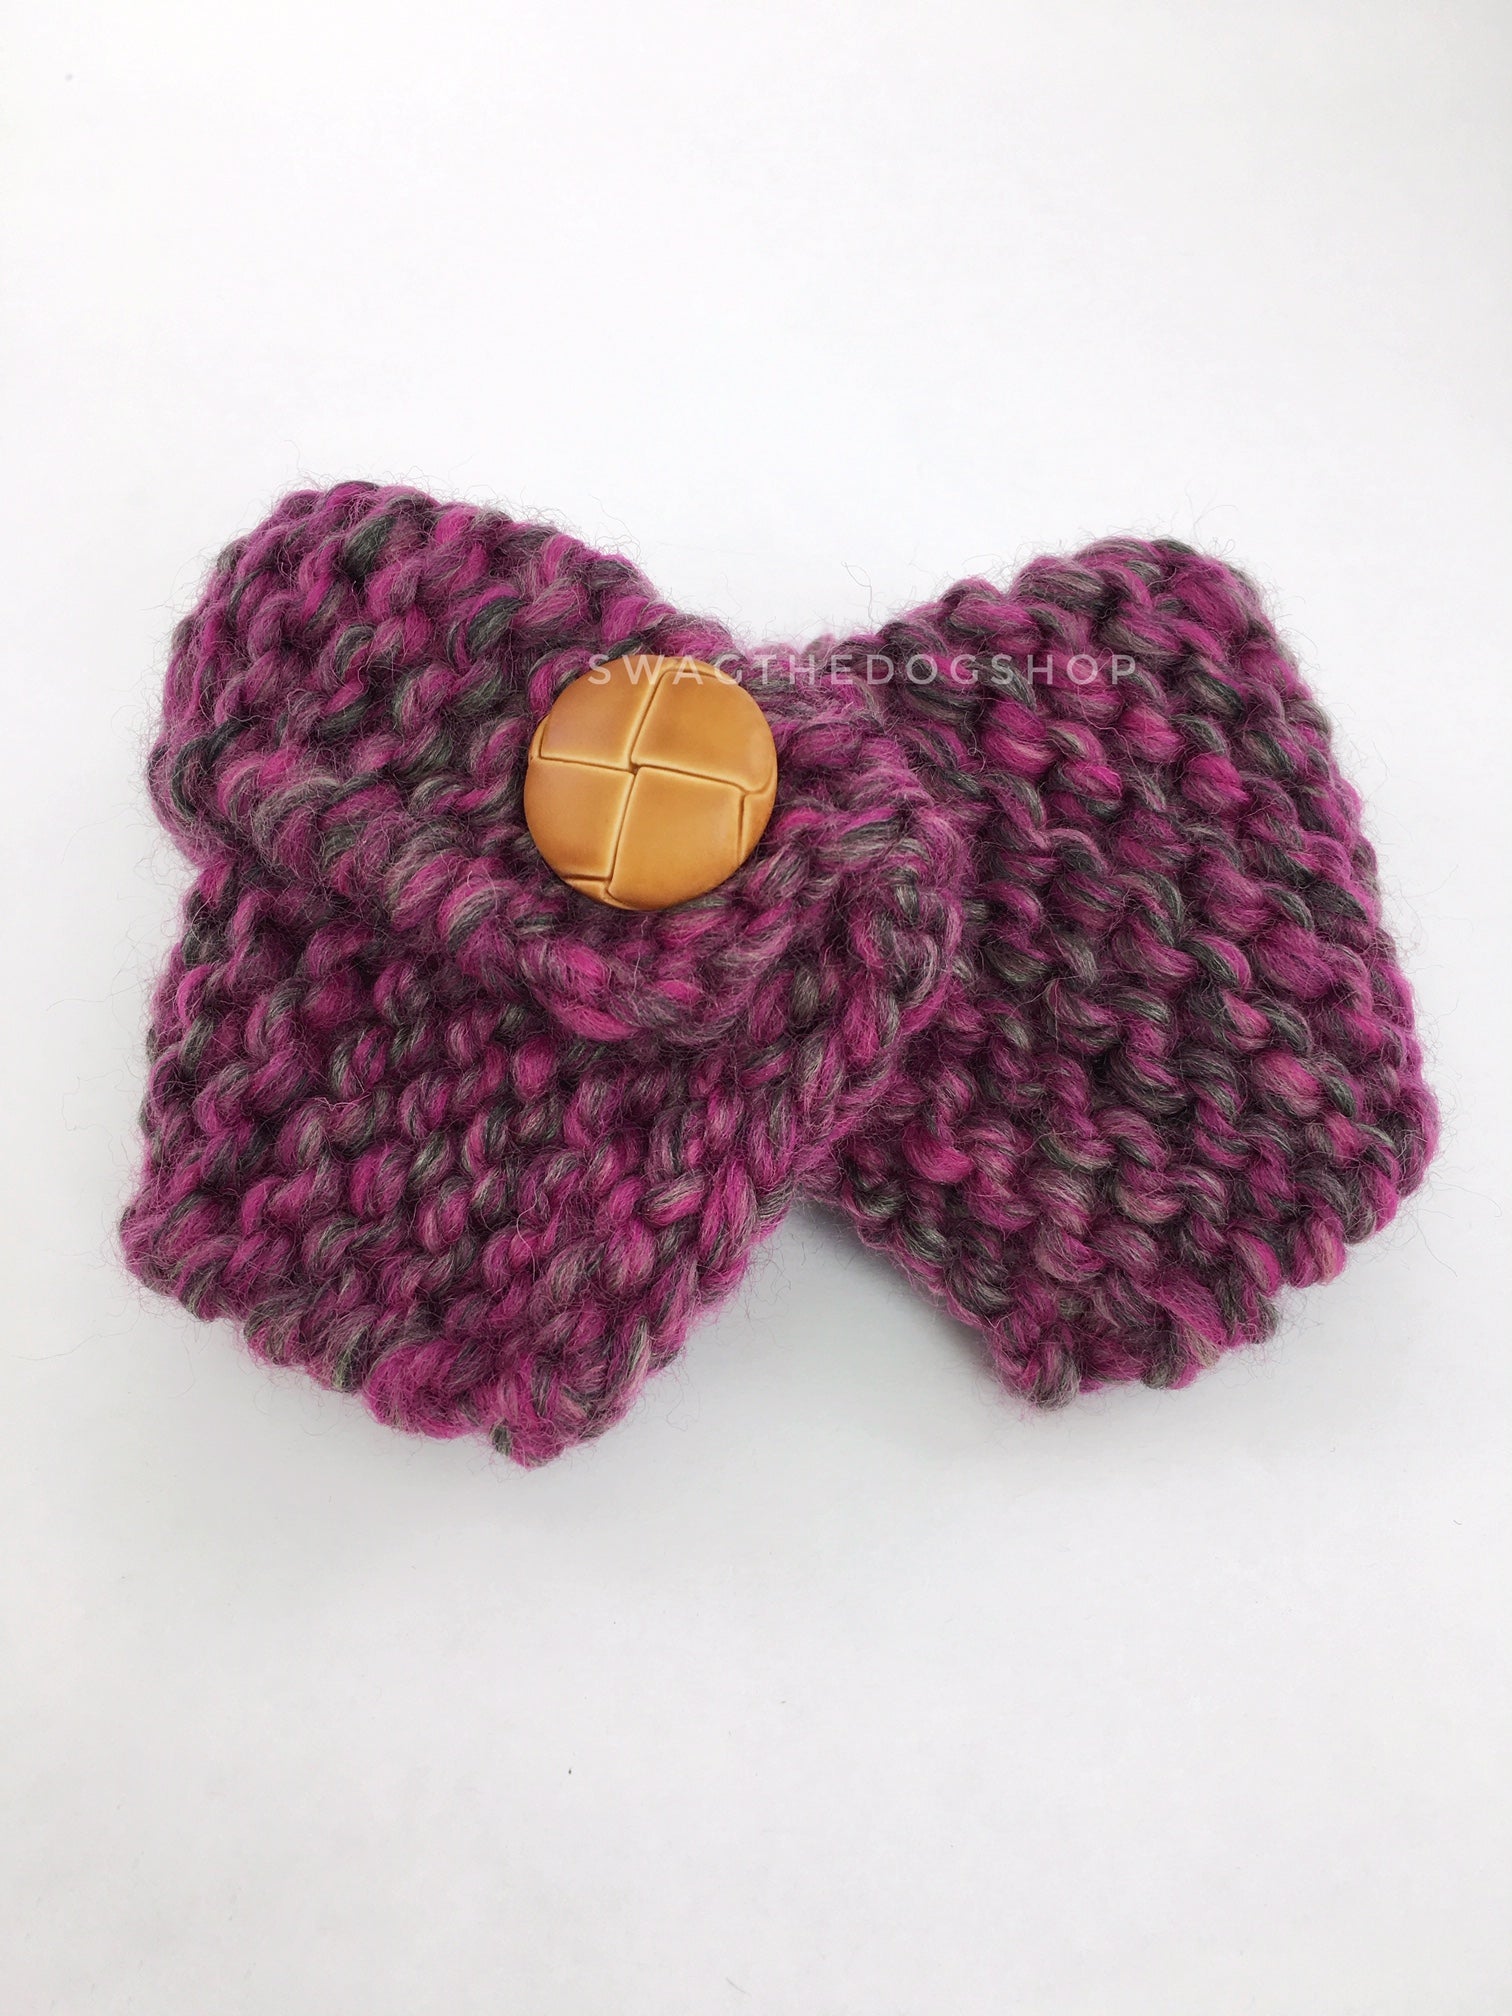 Berries Swagsnood - Product Front View. Pink Gray Mixed Color Dog Snood with Accent Button